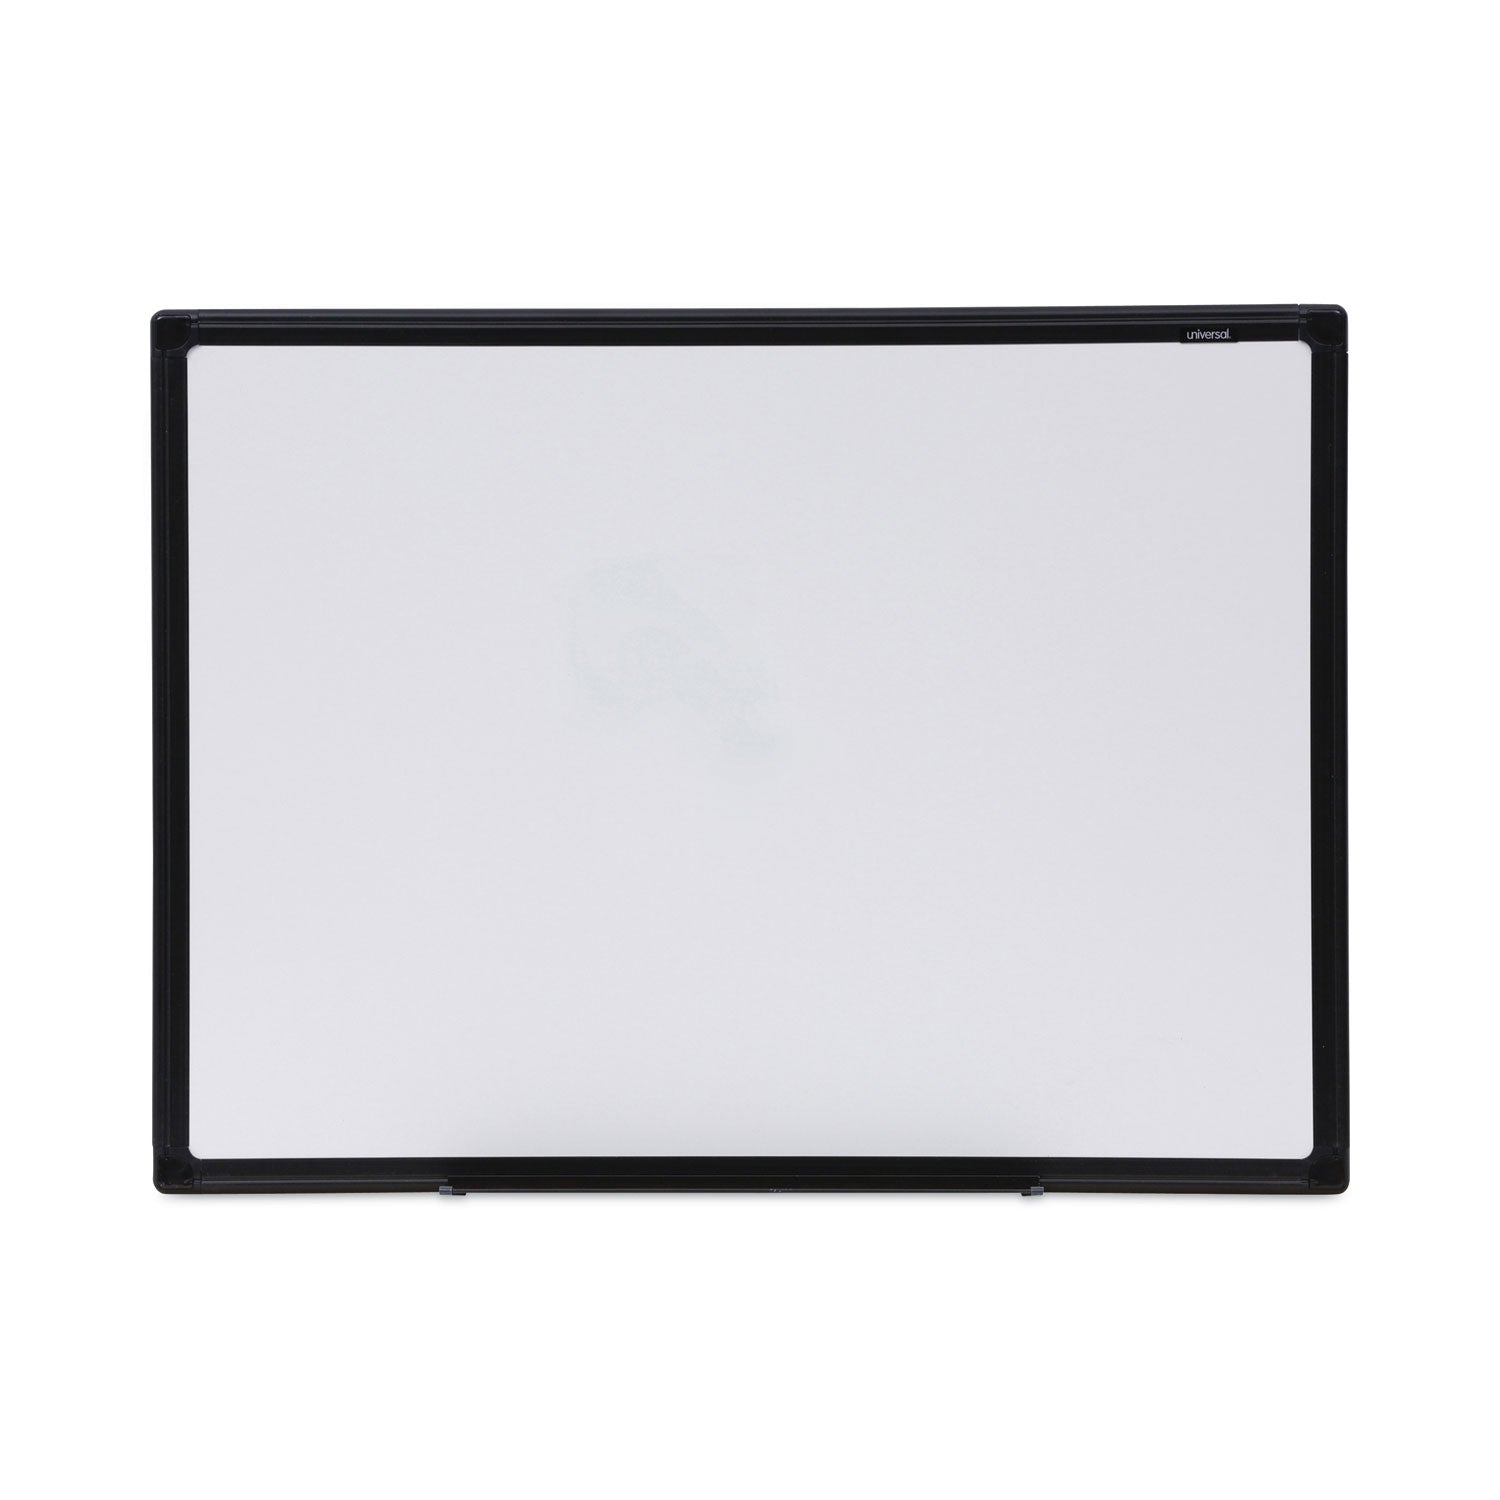 Design Series Deluxe Dry Erase Board, 24 x 18, White Surface, Black Anodized Aluminum Frame - 